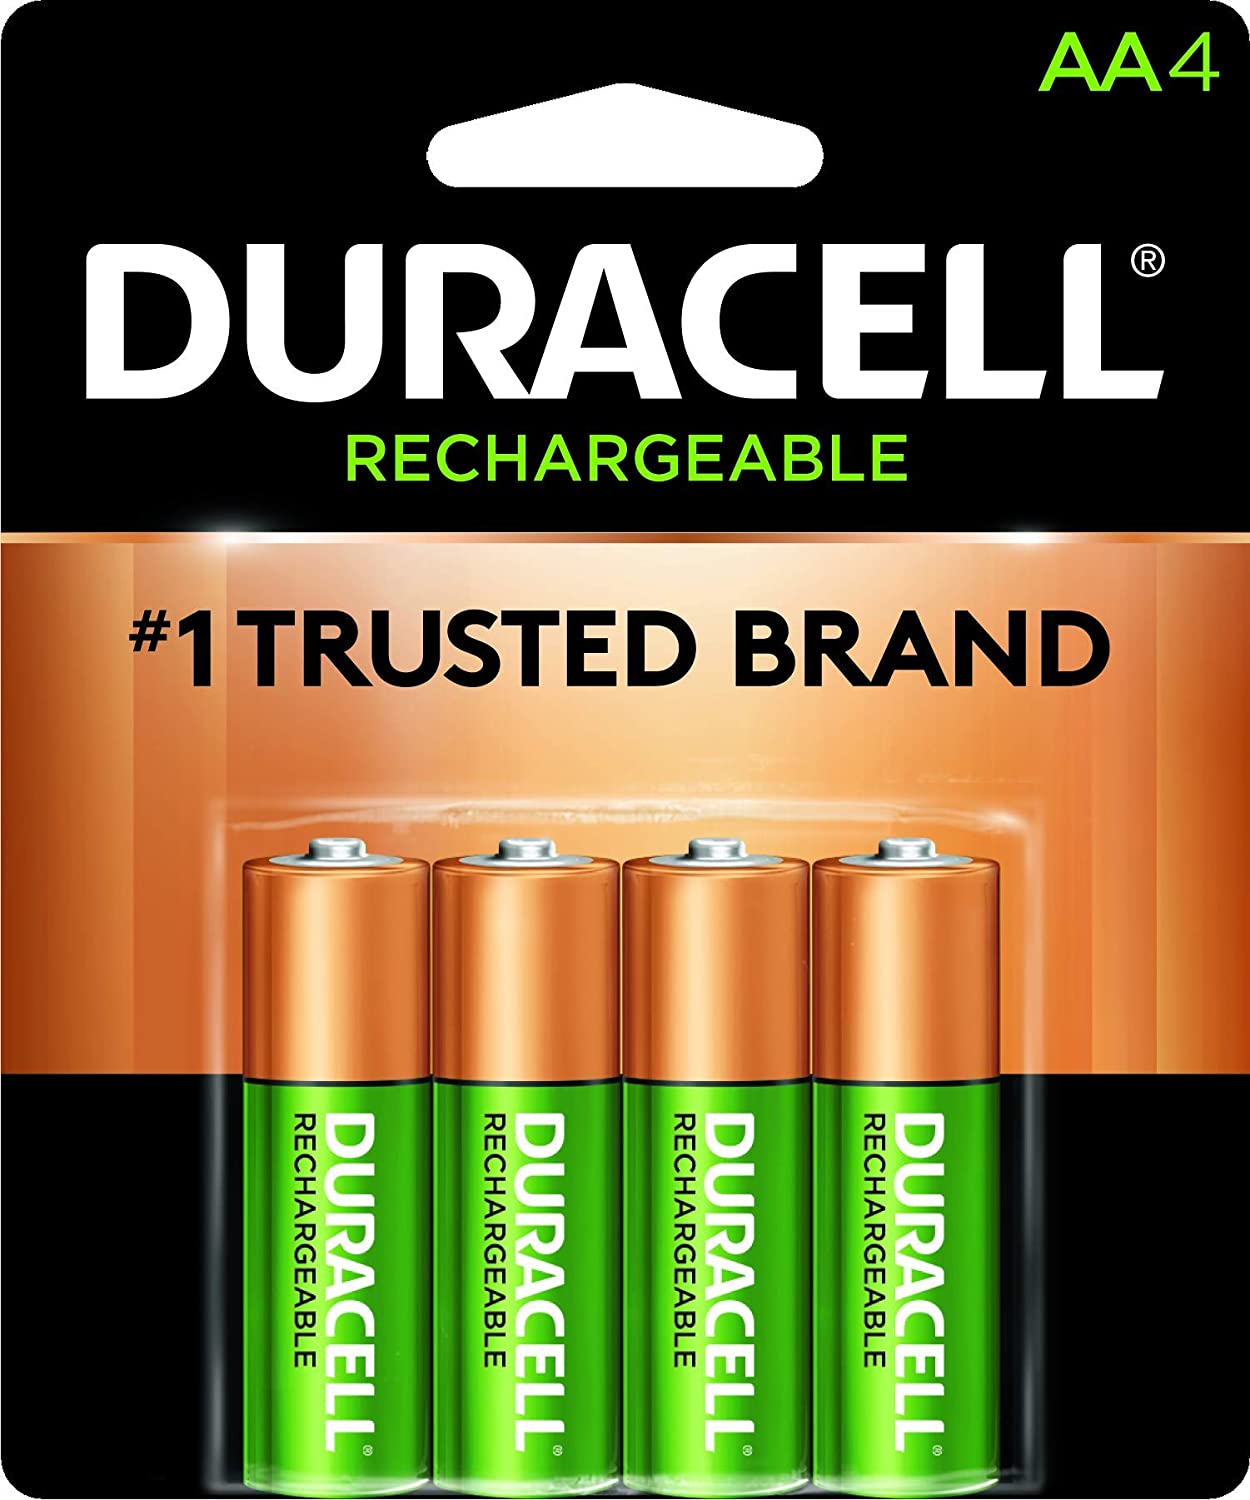 Amazon.com: Duracell - Rechargeable AA Batteries - long lasting, all-purpose Double A battery for household and business - 4 count : Electronics $7.15